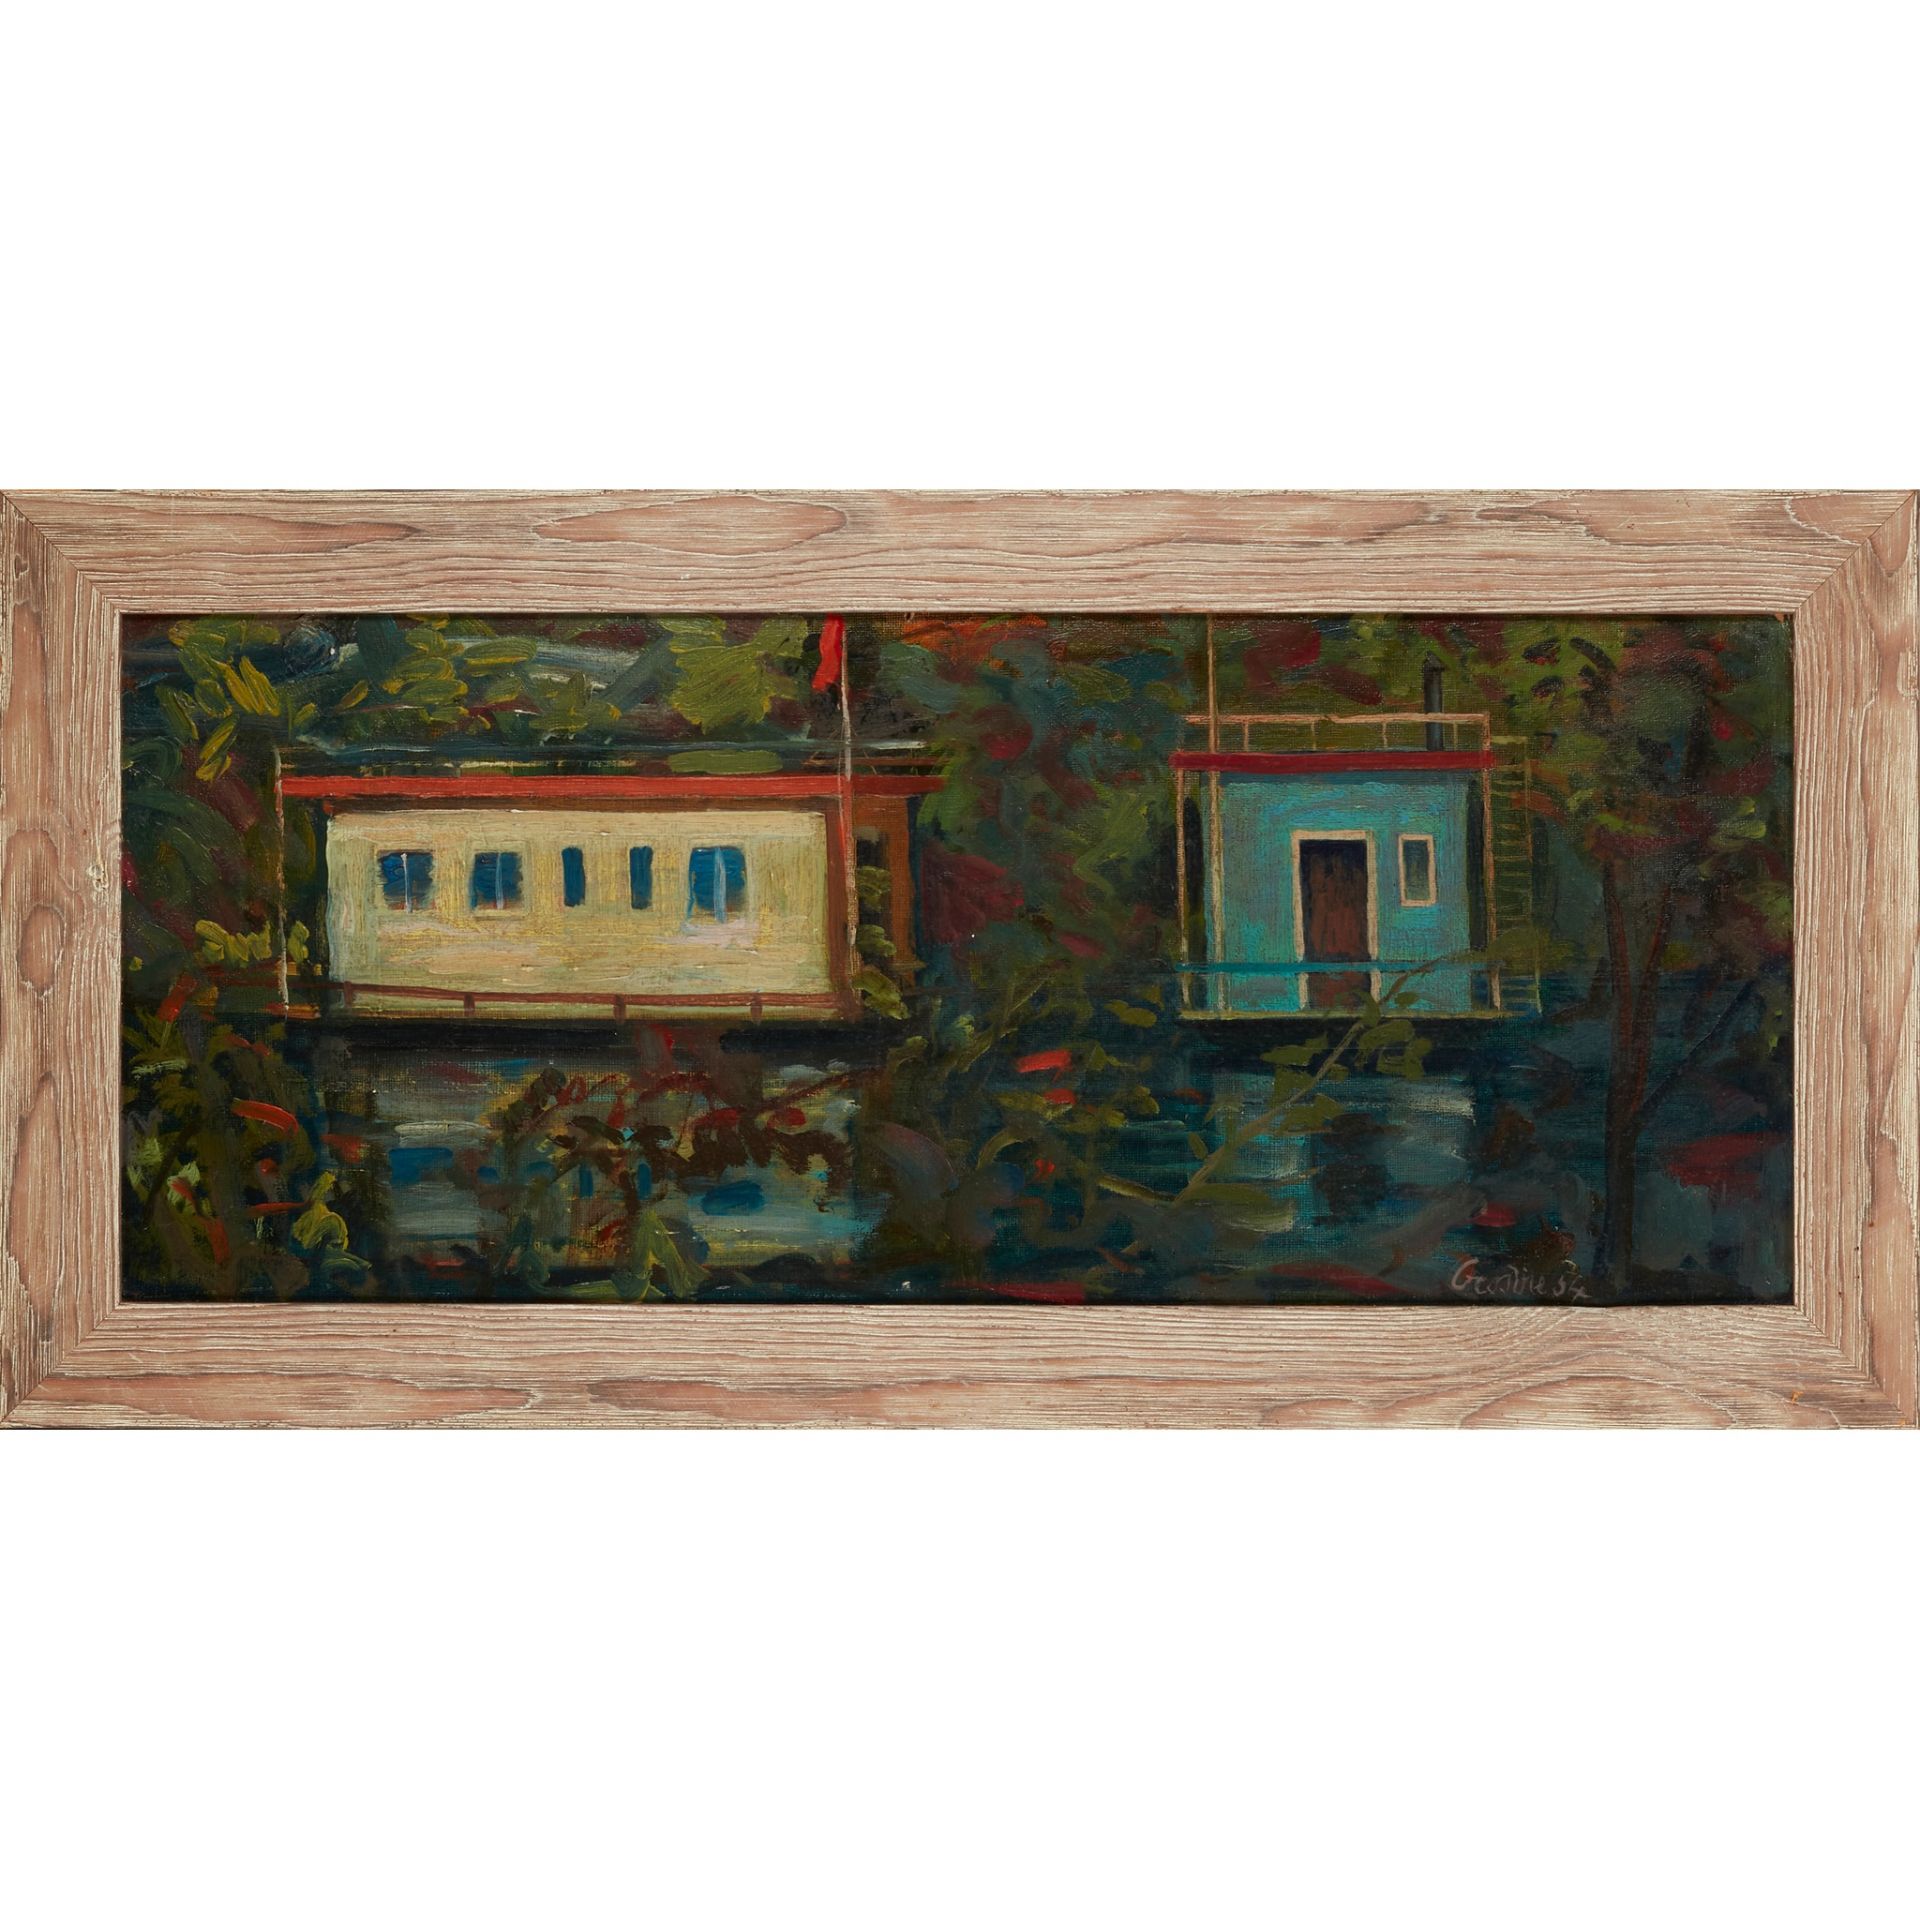 § WILLIAM CROSBIE R.S.A. (SCOTTISH 1915-1999) RIVERBANK CABINS IN WOODLAND - Image 2 of 3